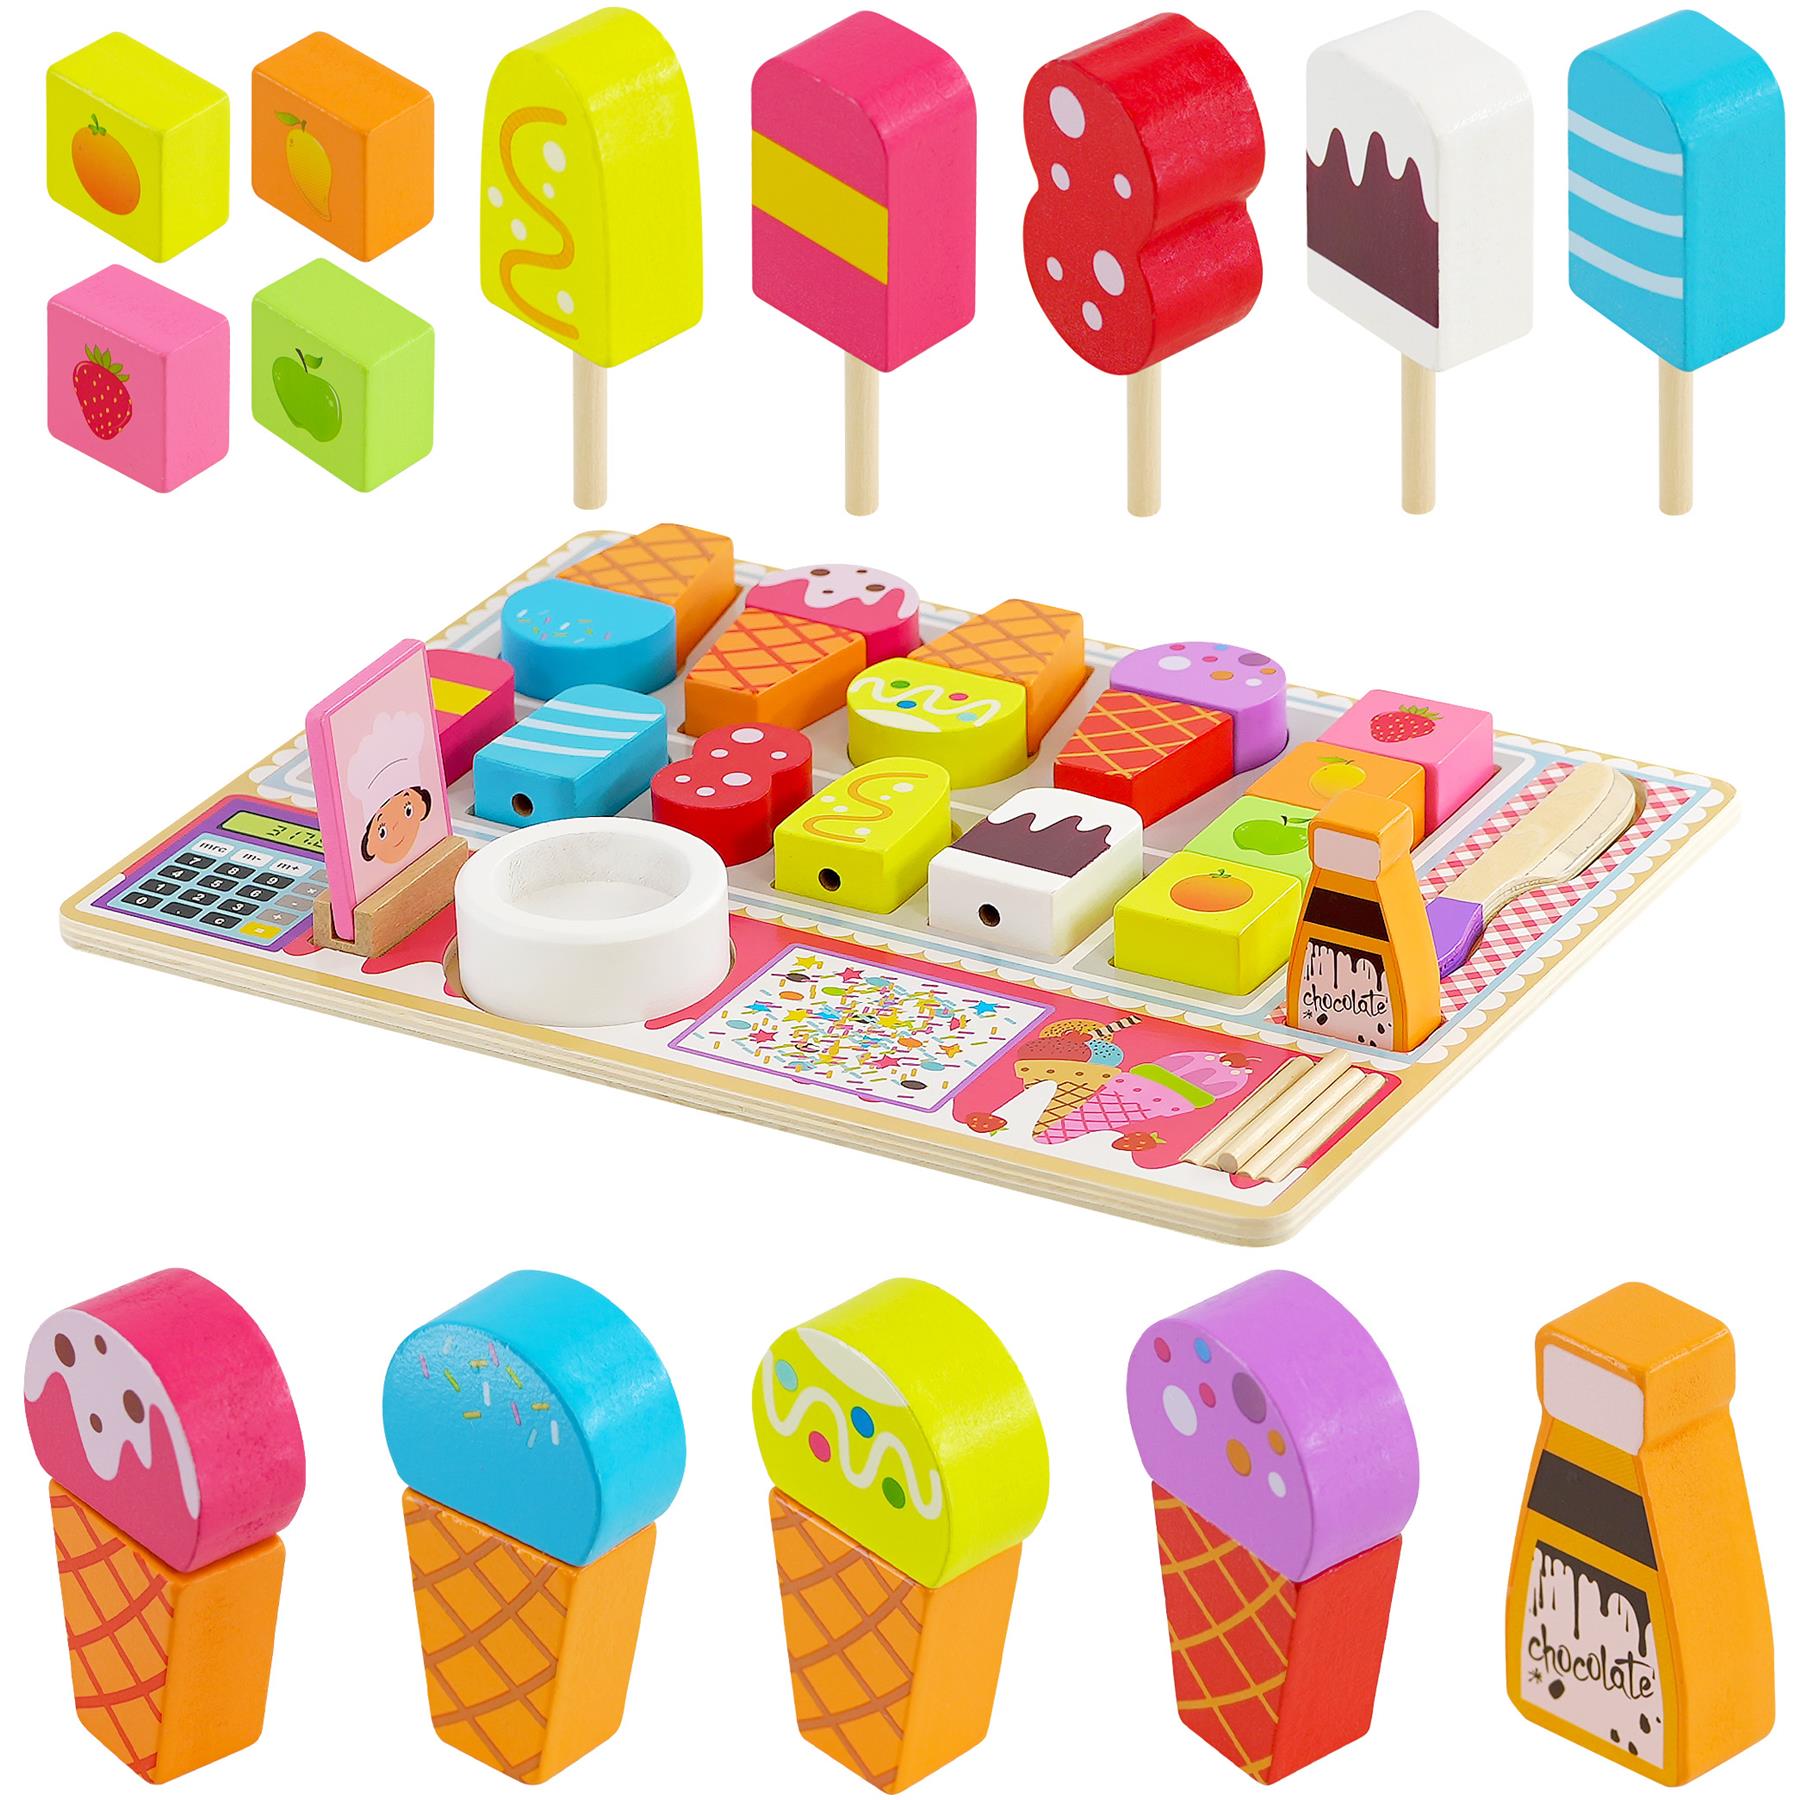 Kids Wooden Ice Cream Shop Set Role Play Toys by The Magic Toy Shop - UKBuyZone